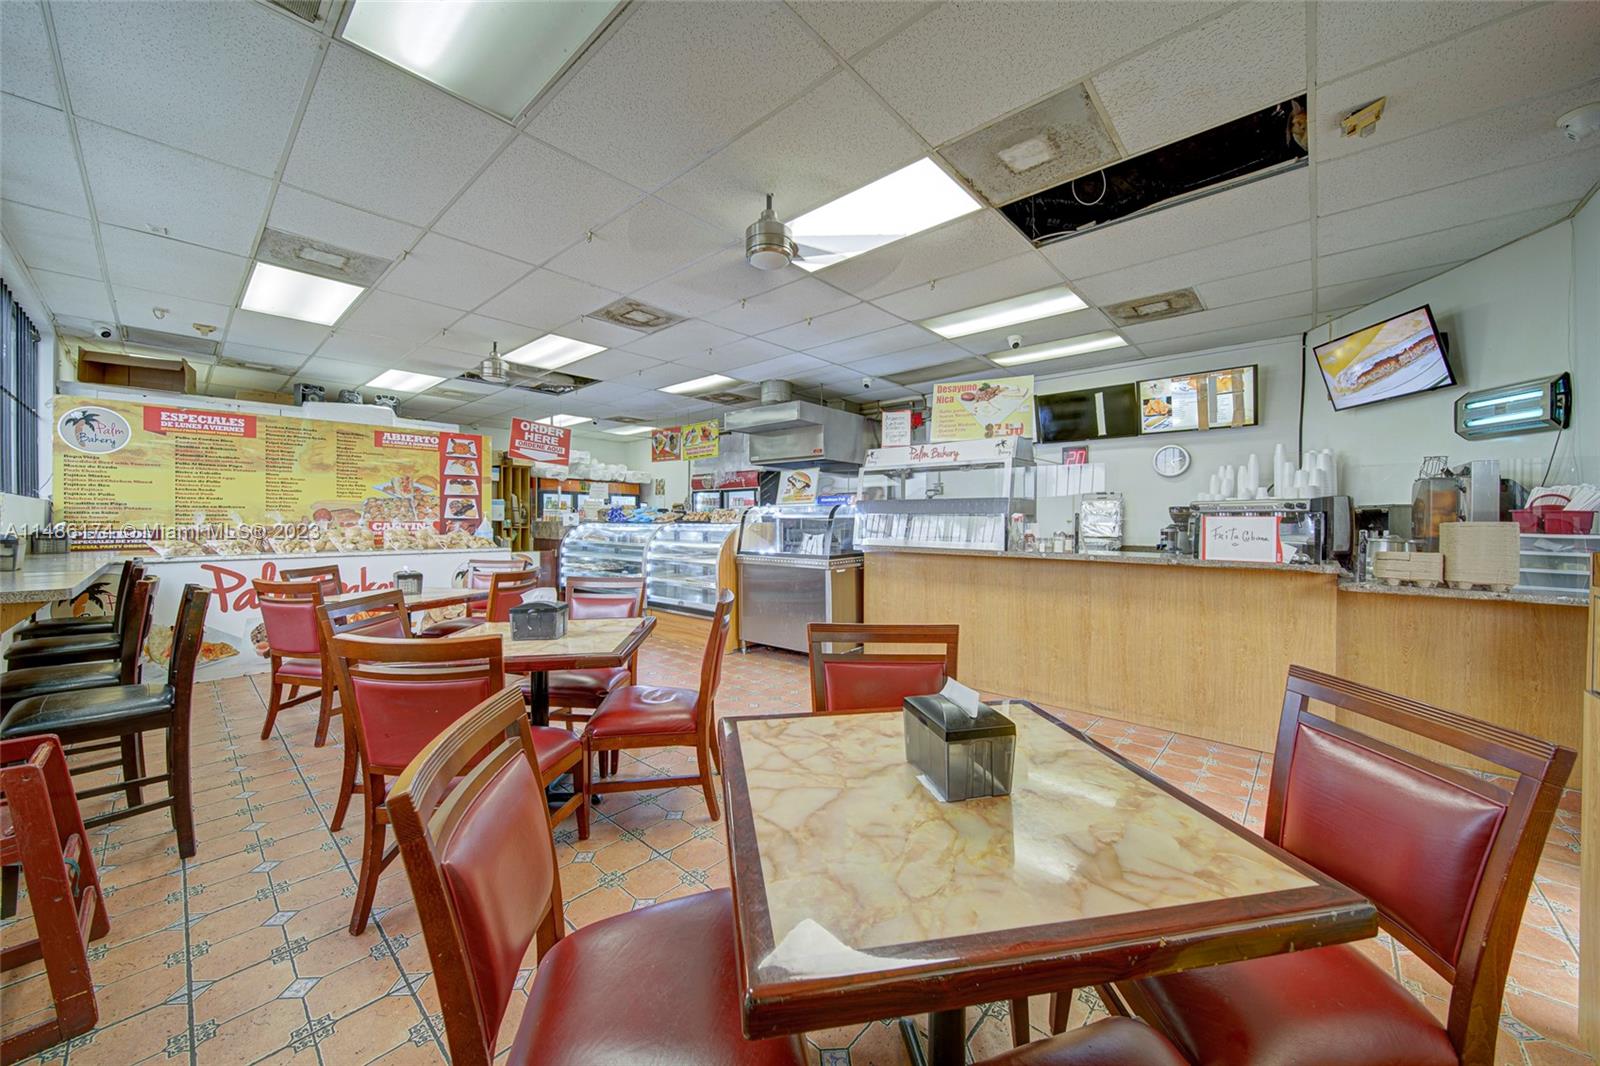 3 Bakeries For Sale In Homestead Property Photo